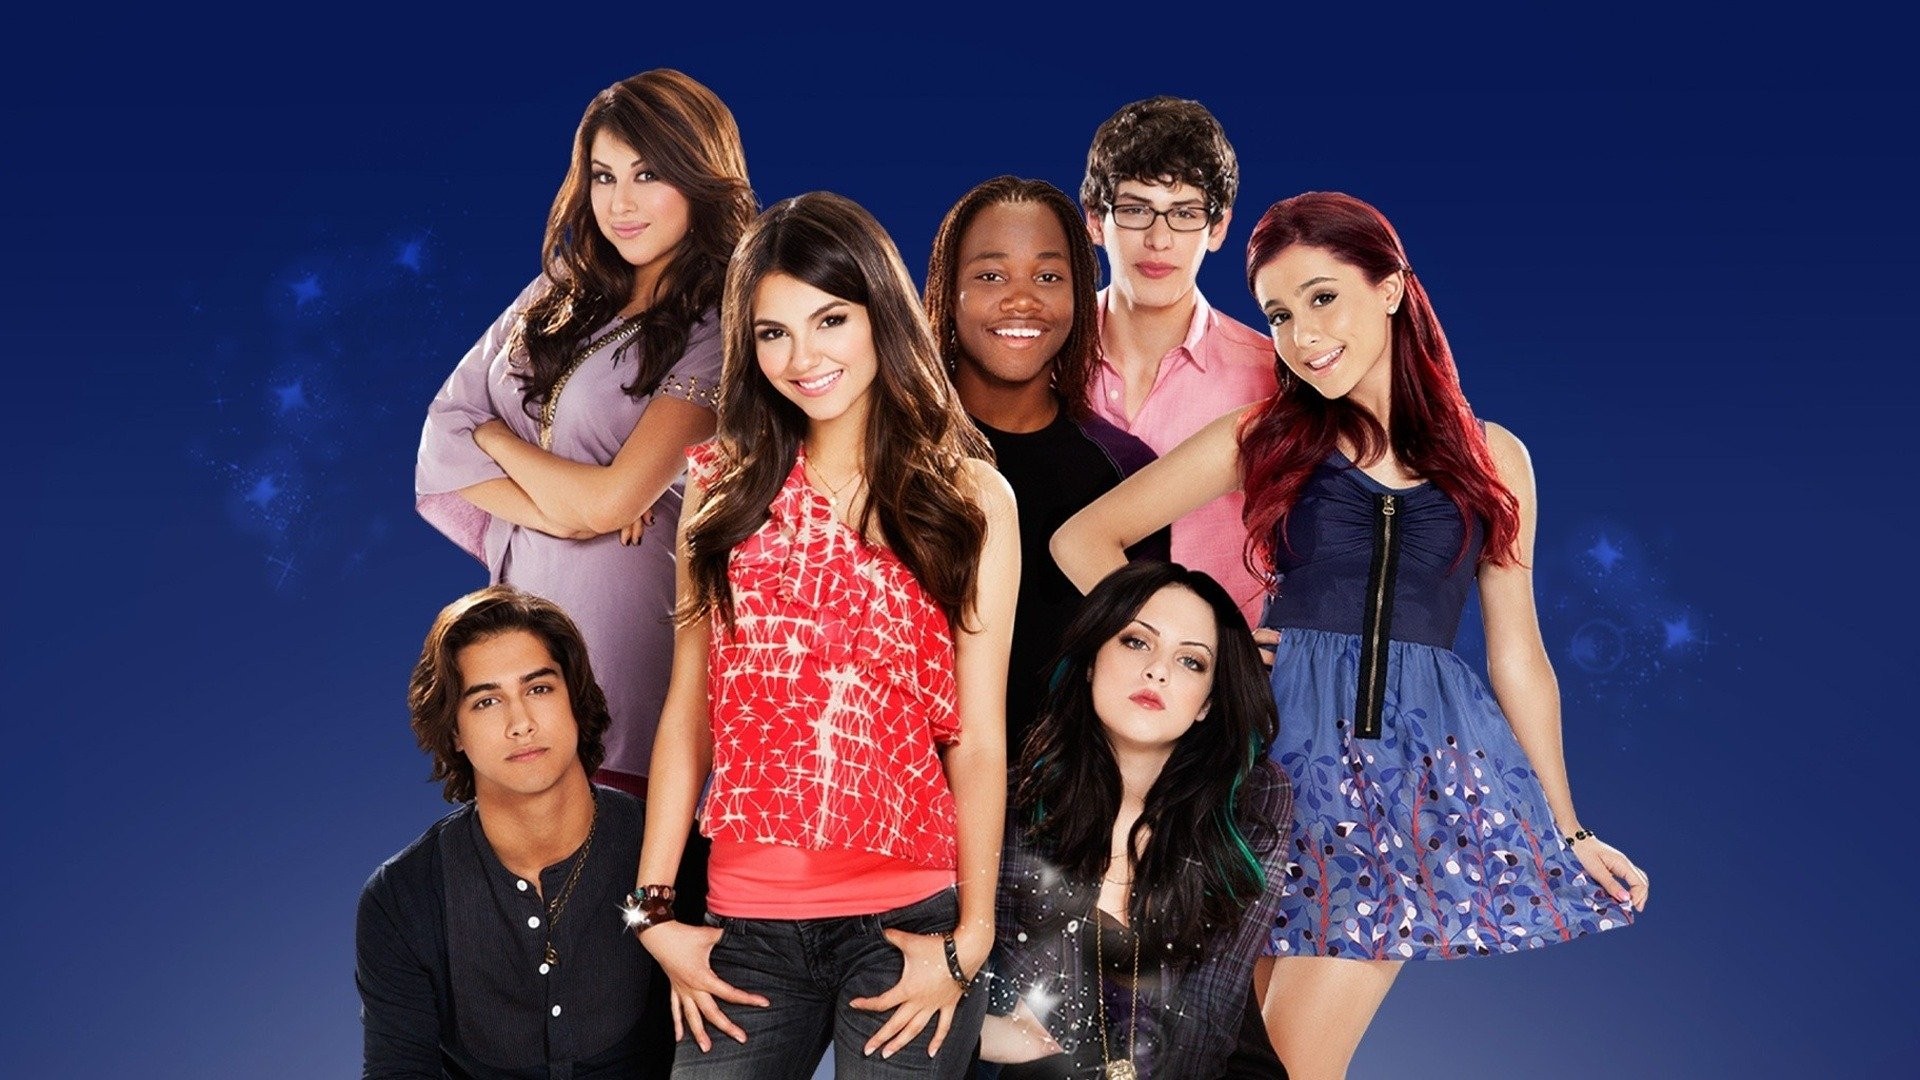 User blog:Catxcrazy/Tag Your Friends! (:, Victorious Wiki